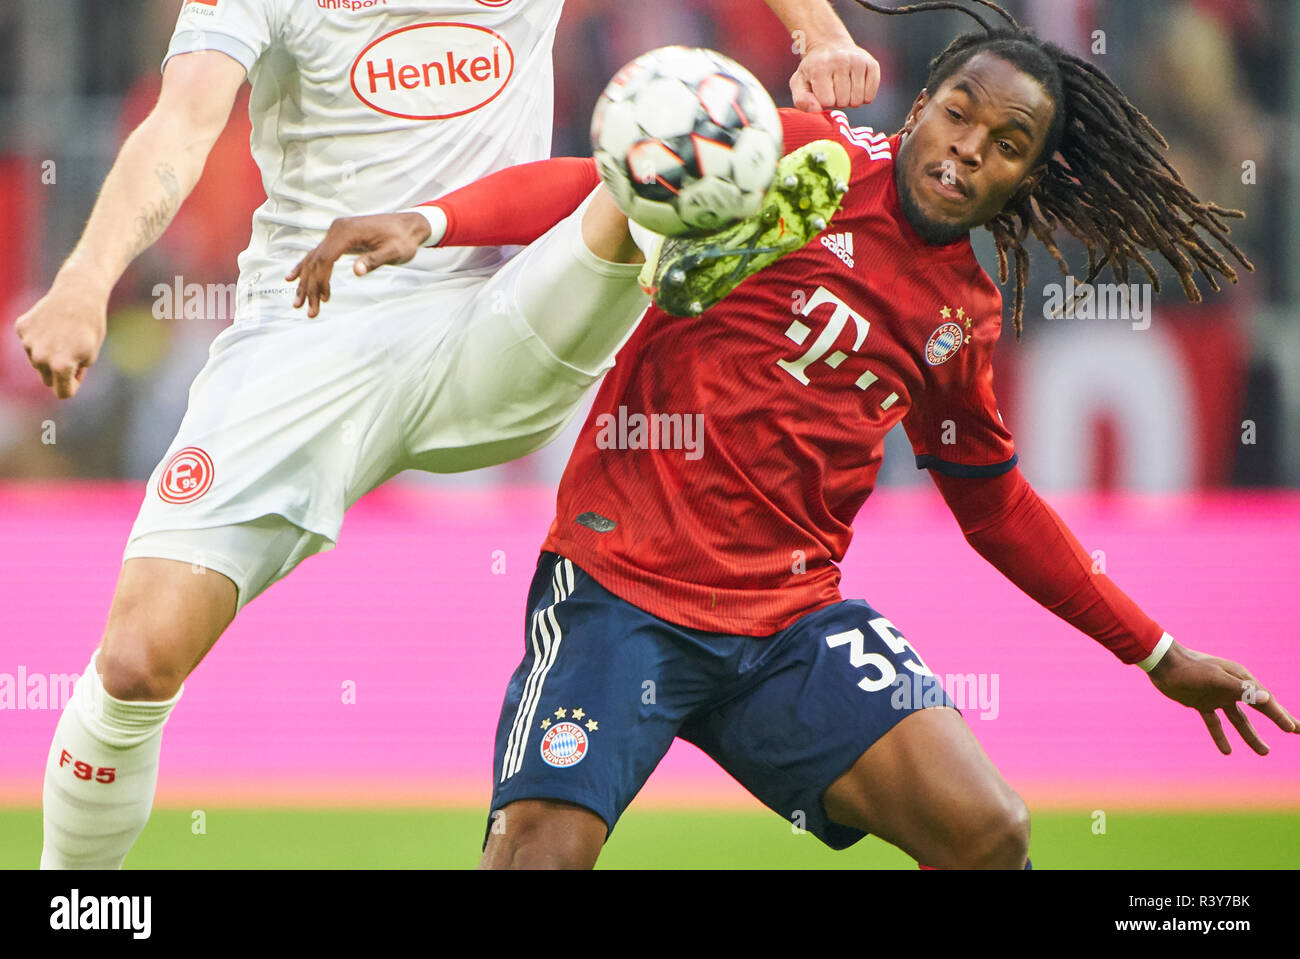 Munich, Germany. 24th Nov 2018. Renato SANCHES, FCB 35  compete for the ball, tackling, duel, header, fight against Andreas LAMBERTZ, D 17  FC BAYERN MUNICH - FORTUNA DUSSELDORF   - DFL REGULATIONS PROHIBIT ANY USE OF PHOTOGRAPHS as IMAGE SEQUENCES and/or QUASI-VIDEO -  1.German Soccer League , Munich, November 24, 2018  Season 2018/2019, matchday 12, FCB, Düsseldorf  Credit: Peter Schatz/Alamy Live News Stock Photo